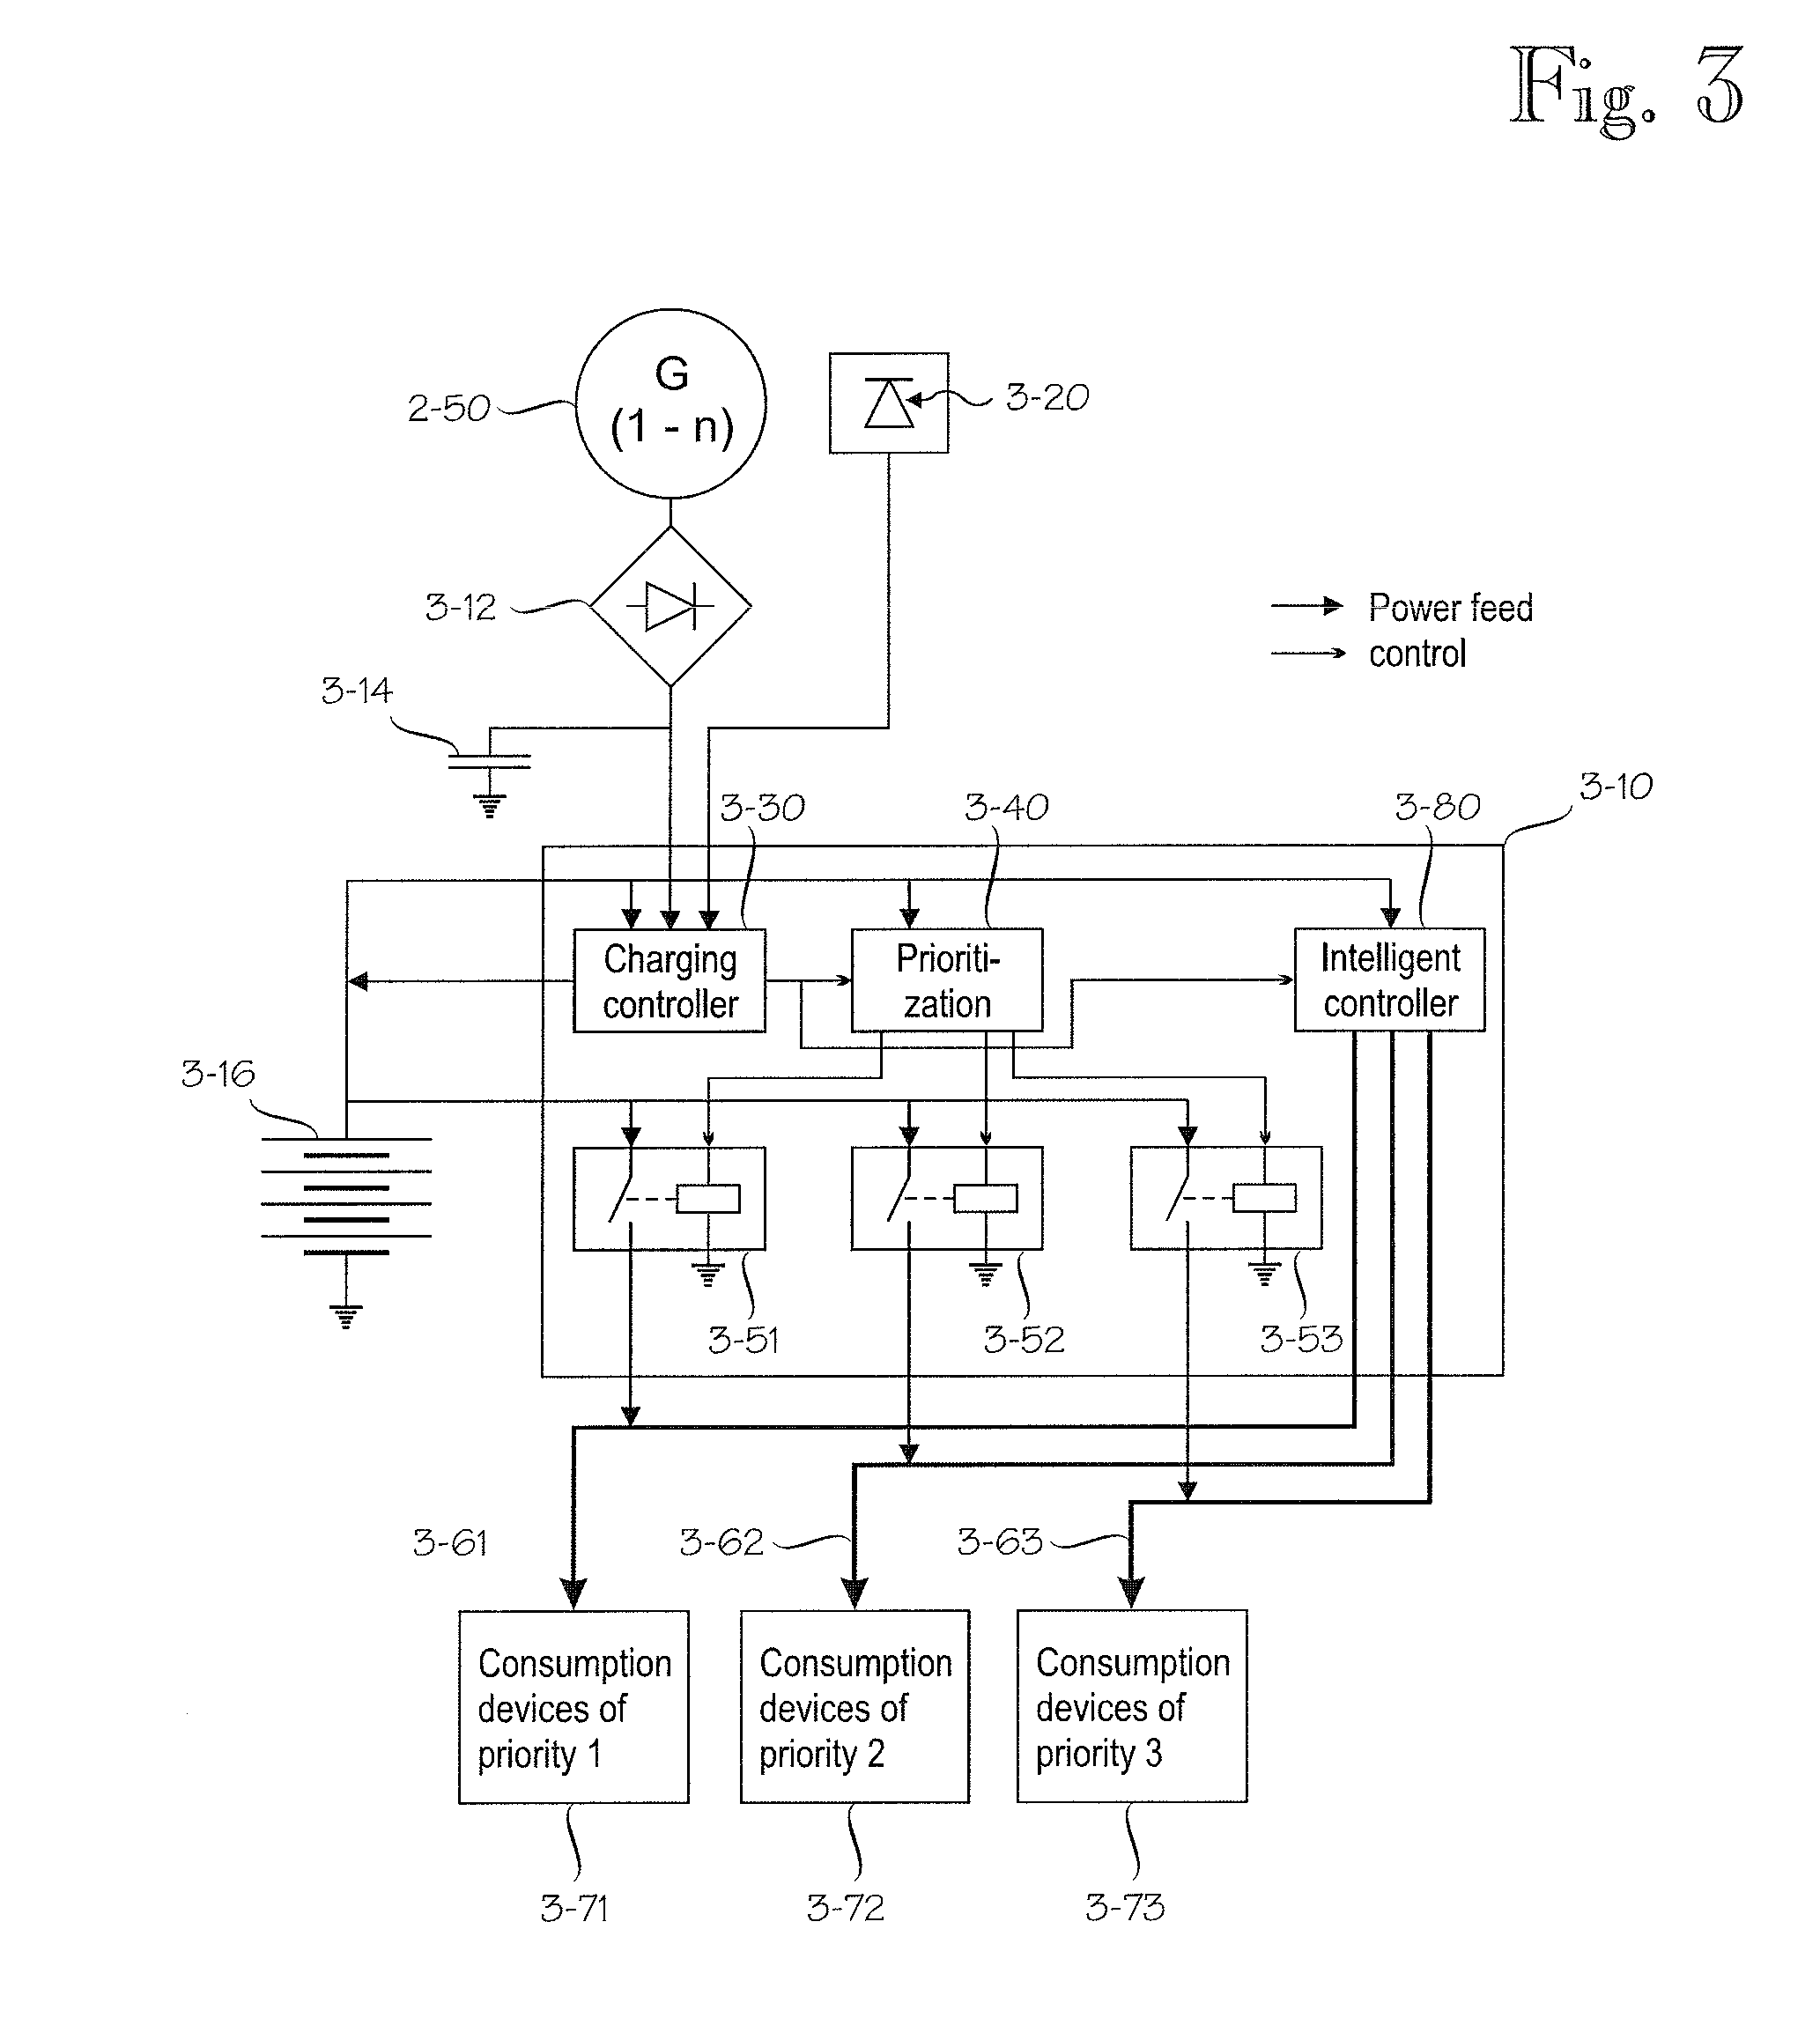 Apparatus and method in connection with crane sheave